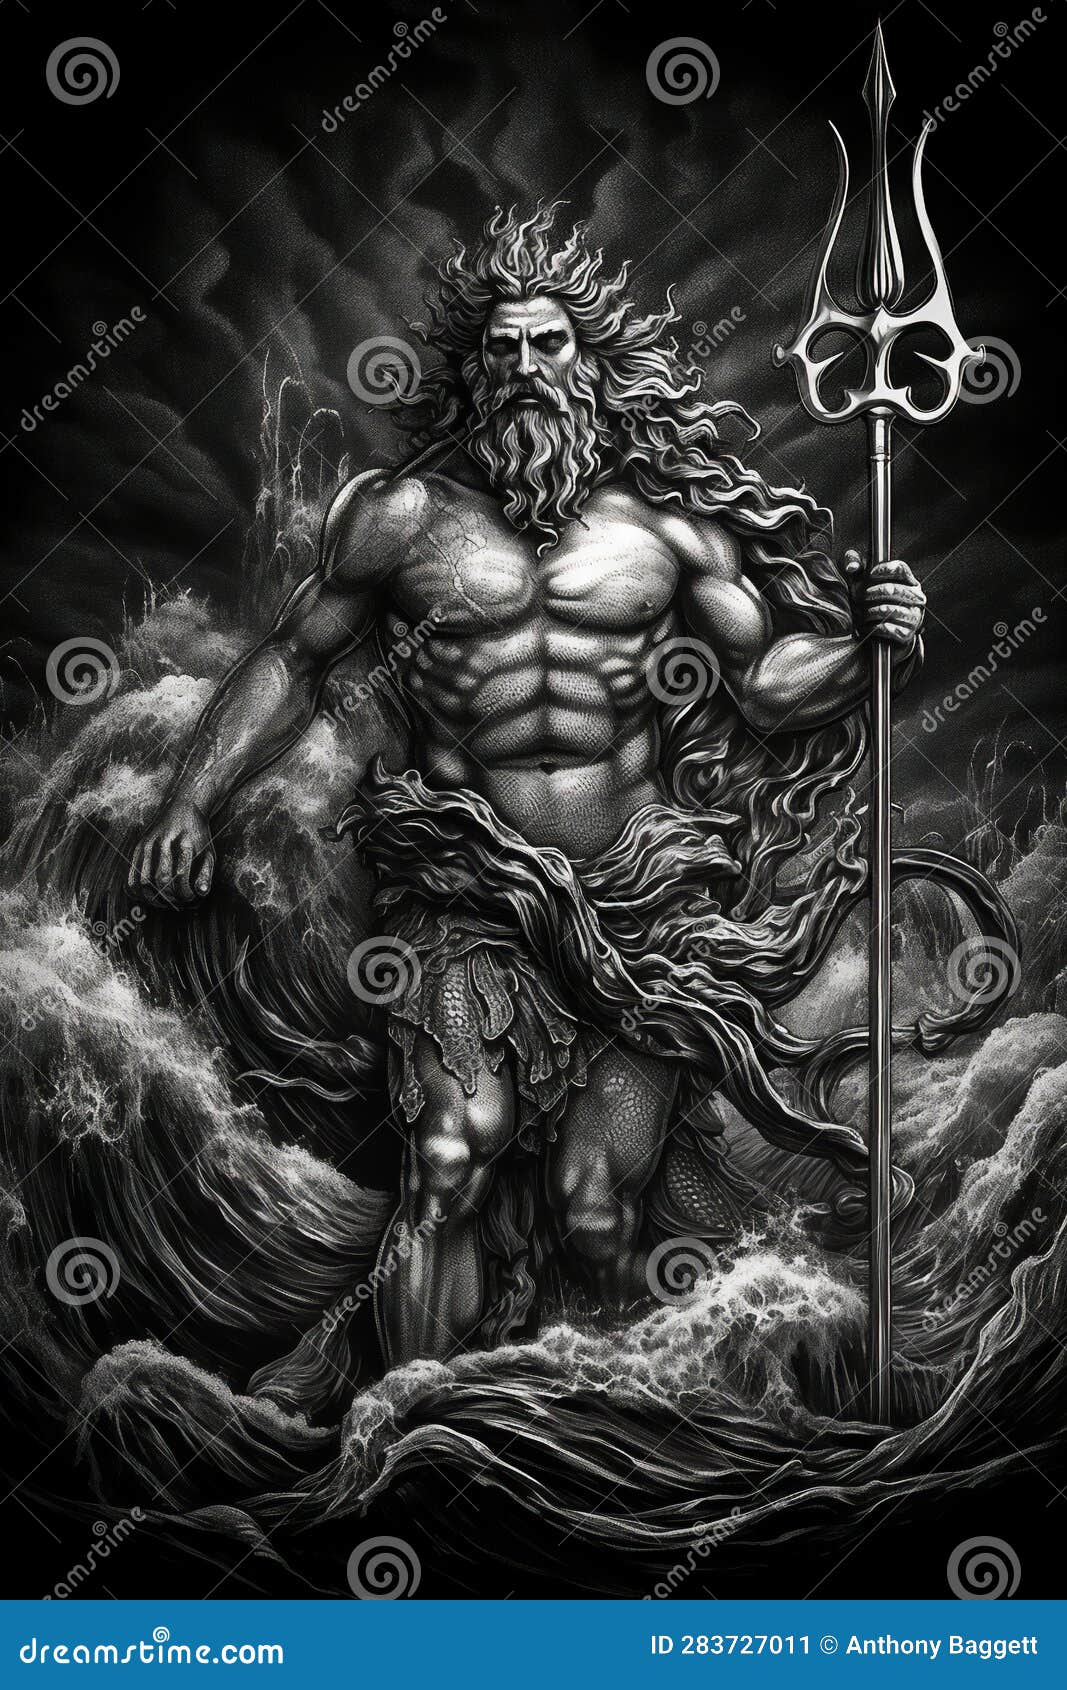 engraving portrait of neptune the roman god of the sea who's greek equivalent is poseidon